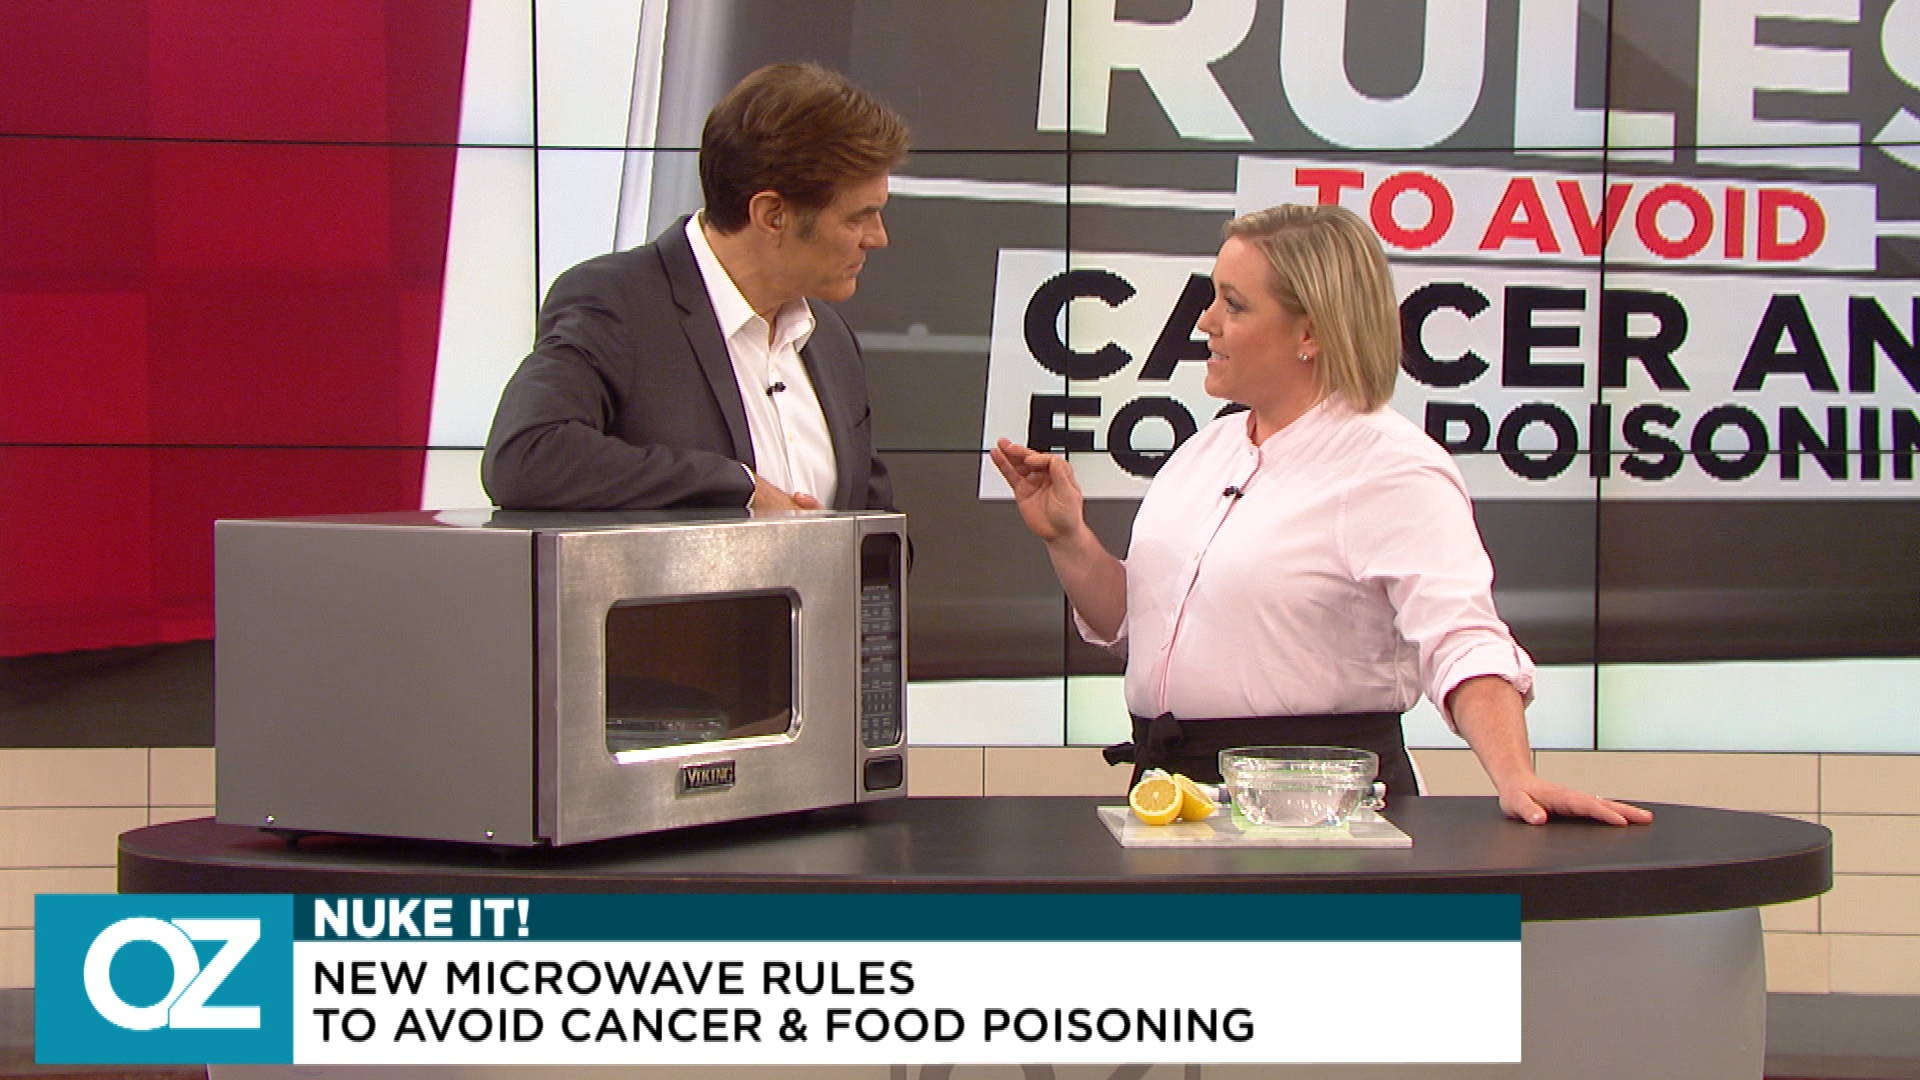 Can Microwaves Cause Cancer?